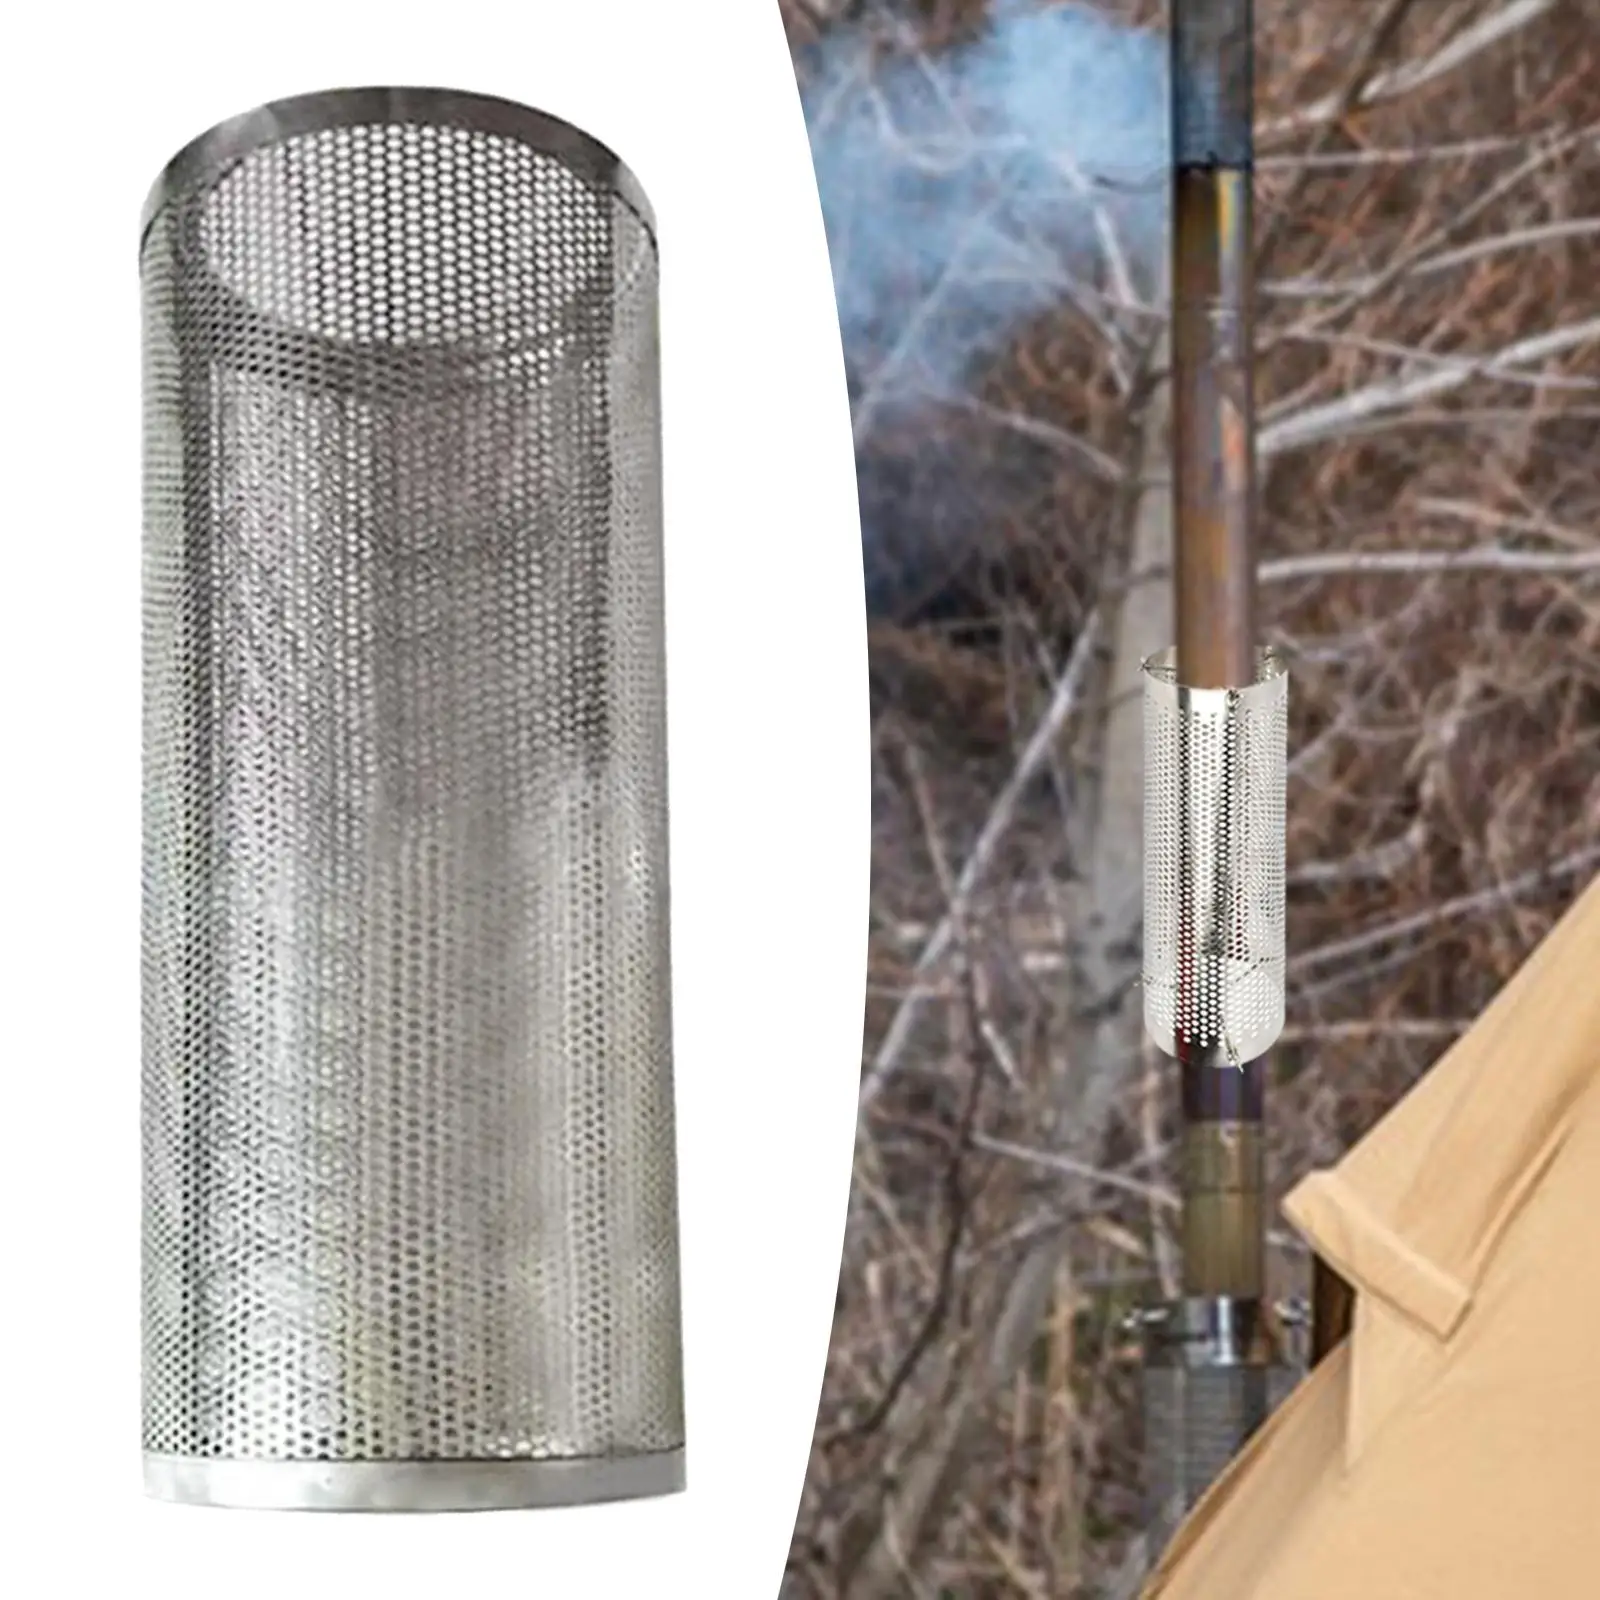 Chimney Spark Arrestor Durable Heat Resistant Stove Pipe Mesh Chimney Tube Filter Screen for Winter Heater Camping Furnace